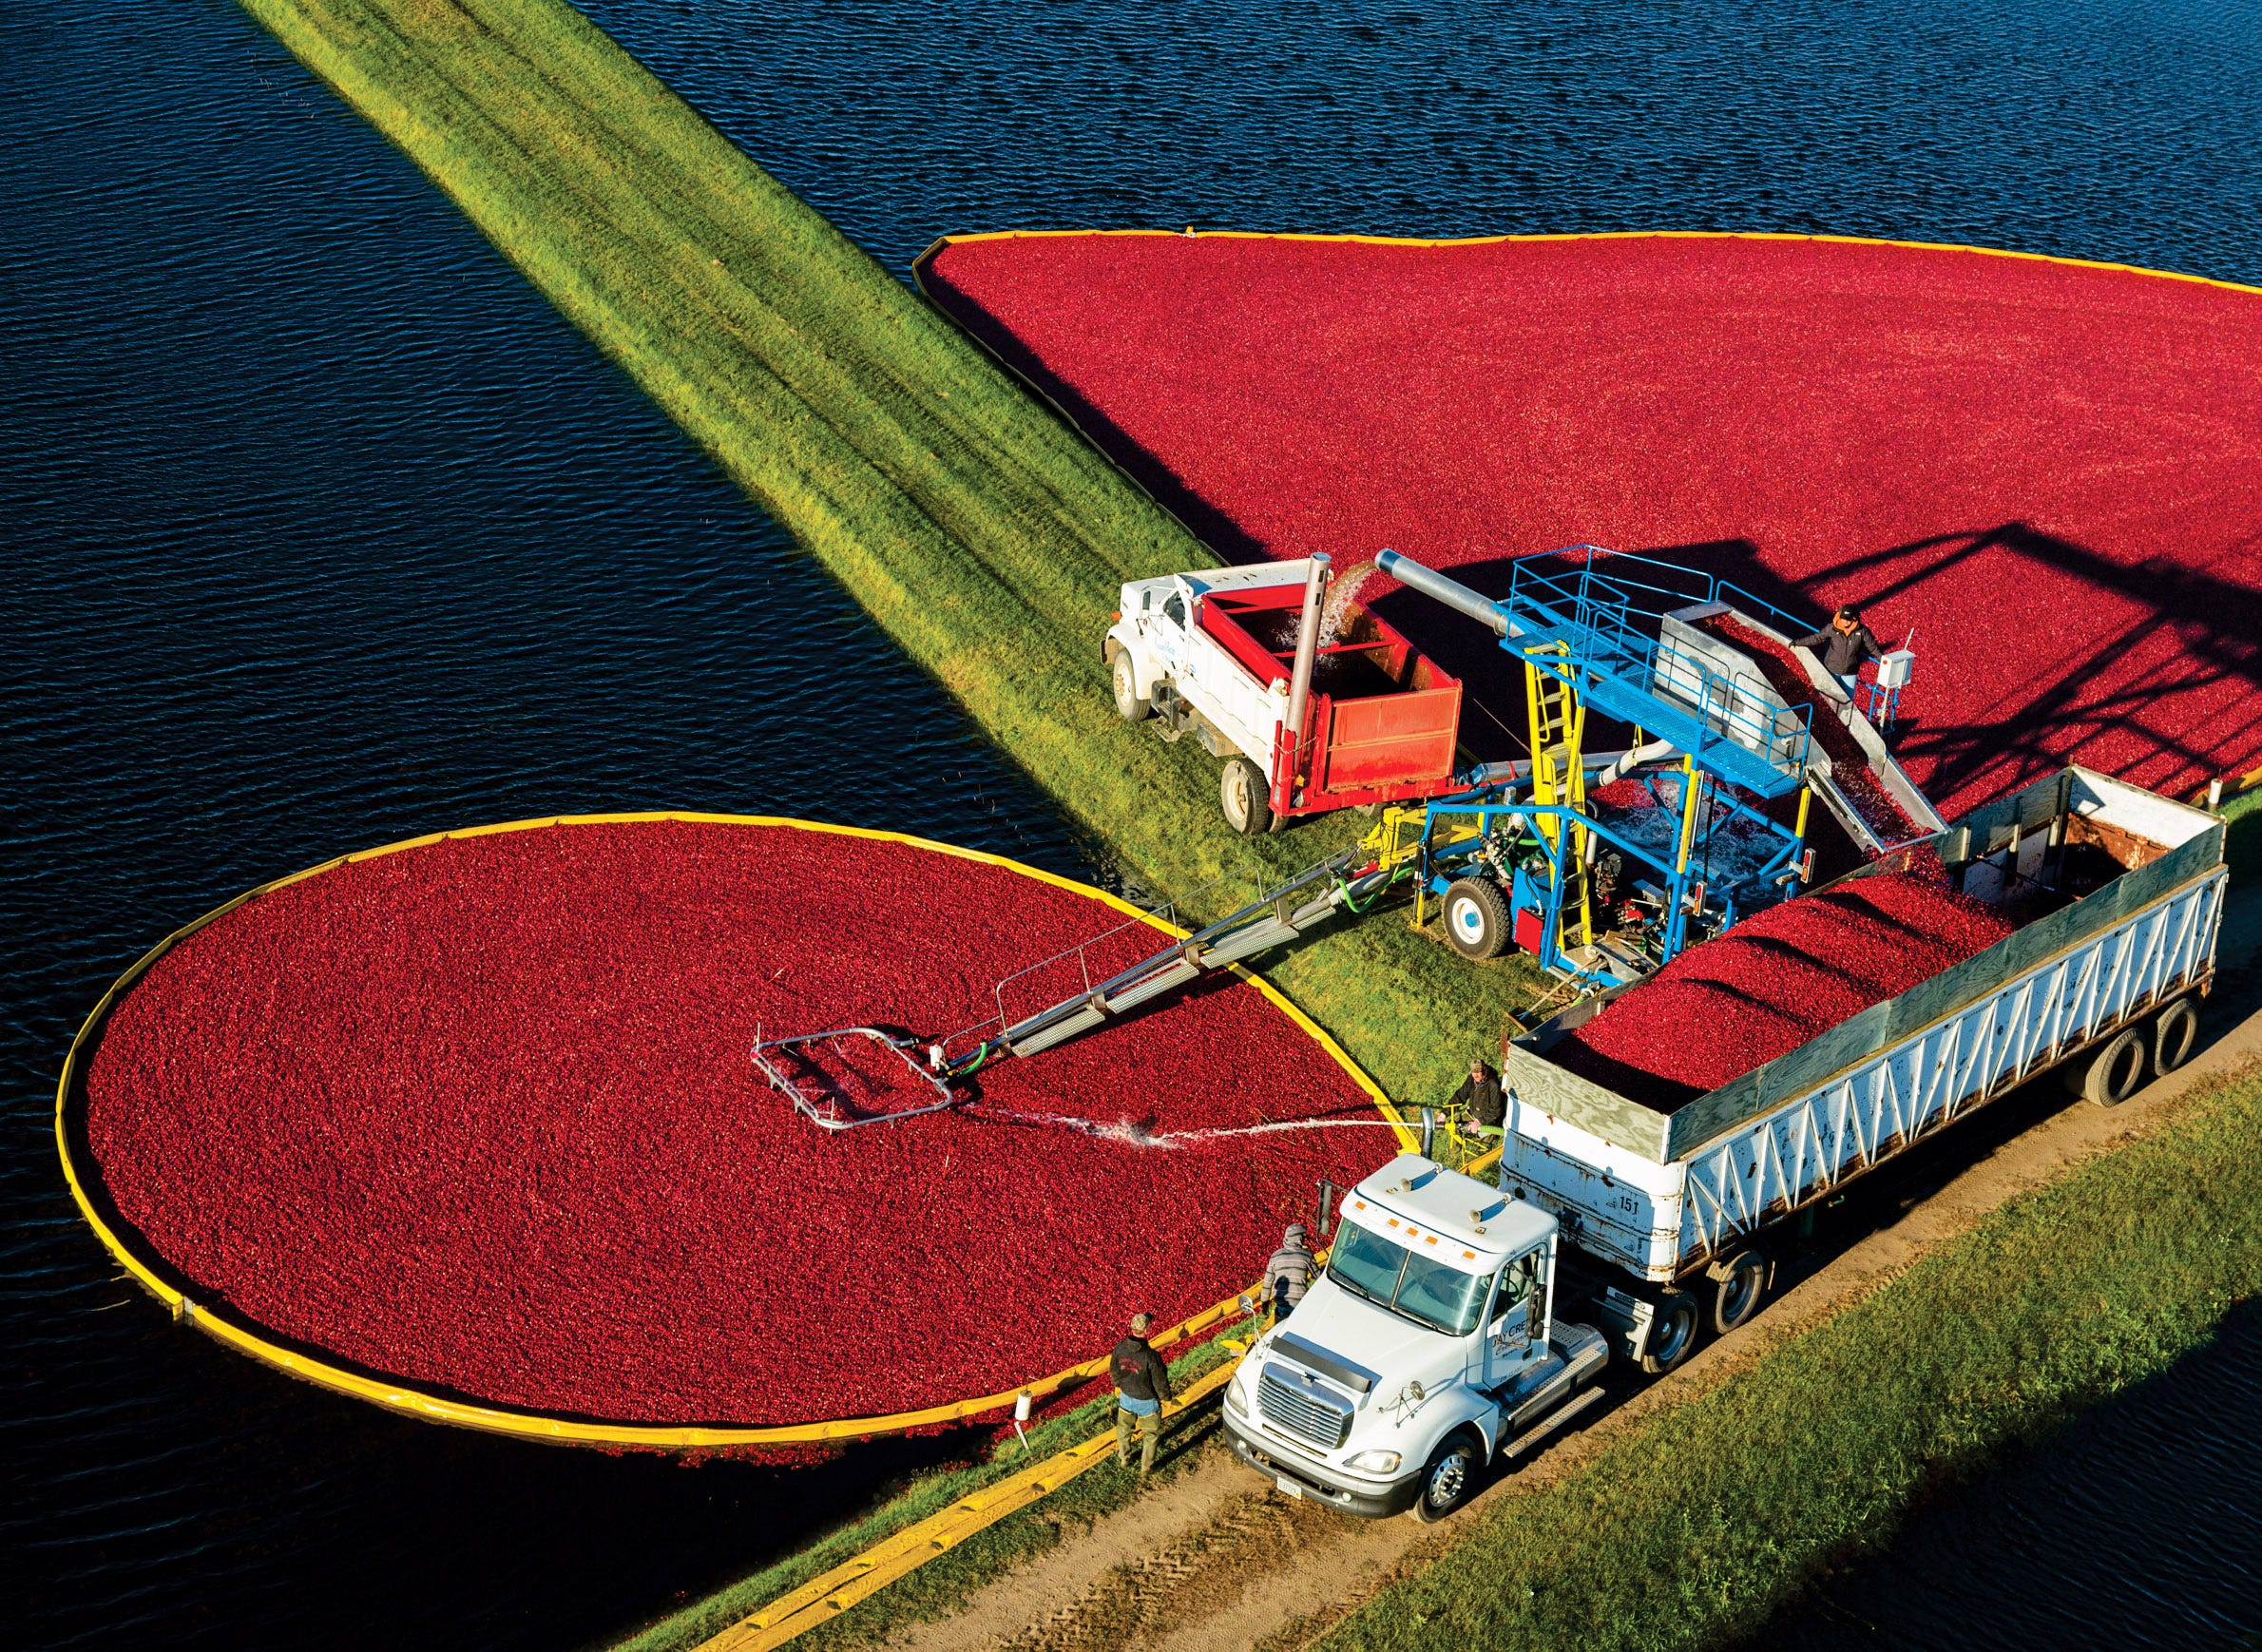 Cranberry production shown in 2018 in Warrens, Wis., the home of the Warrens Cranberry Festival and many cranberry growers.